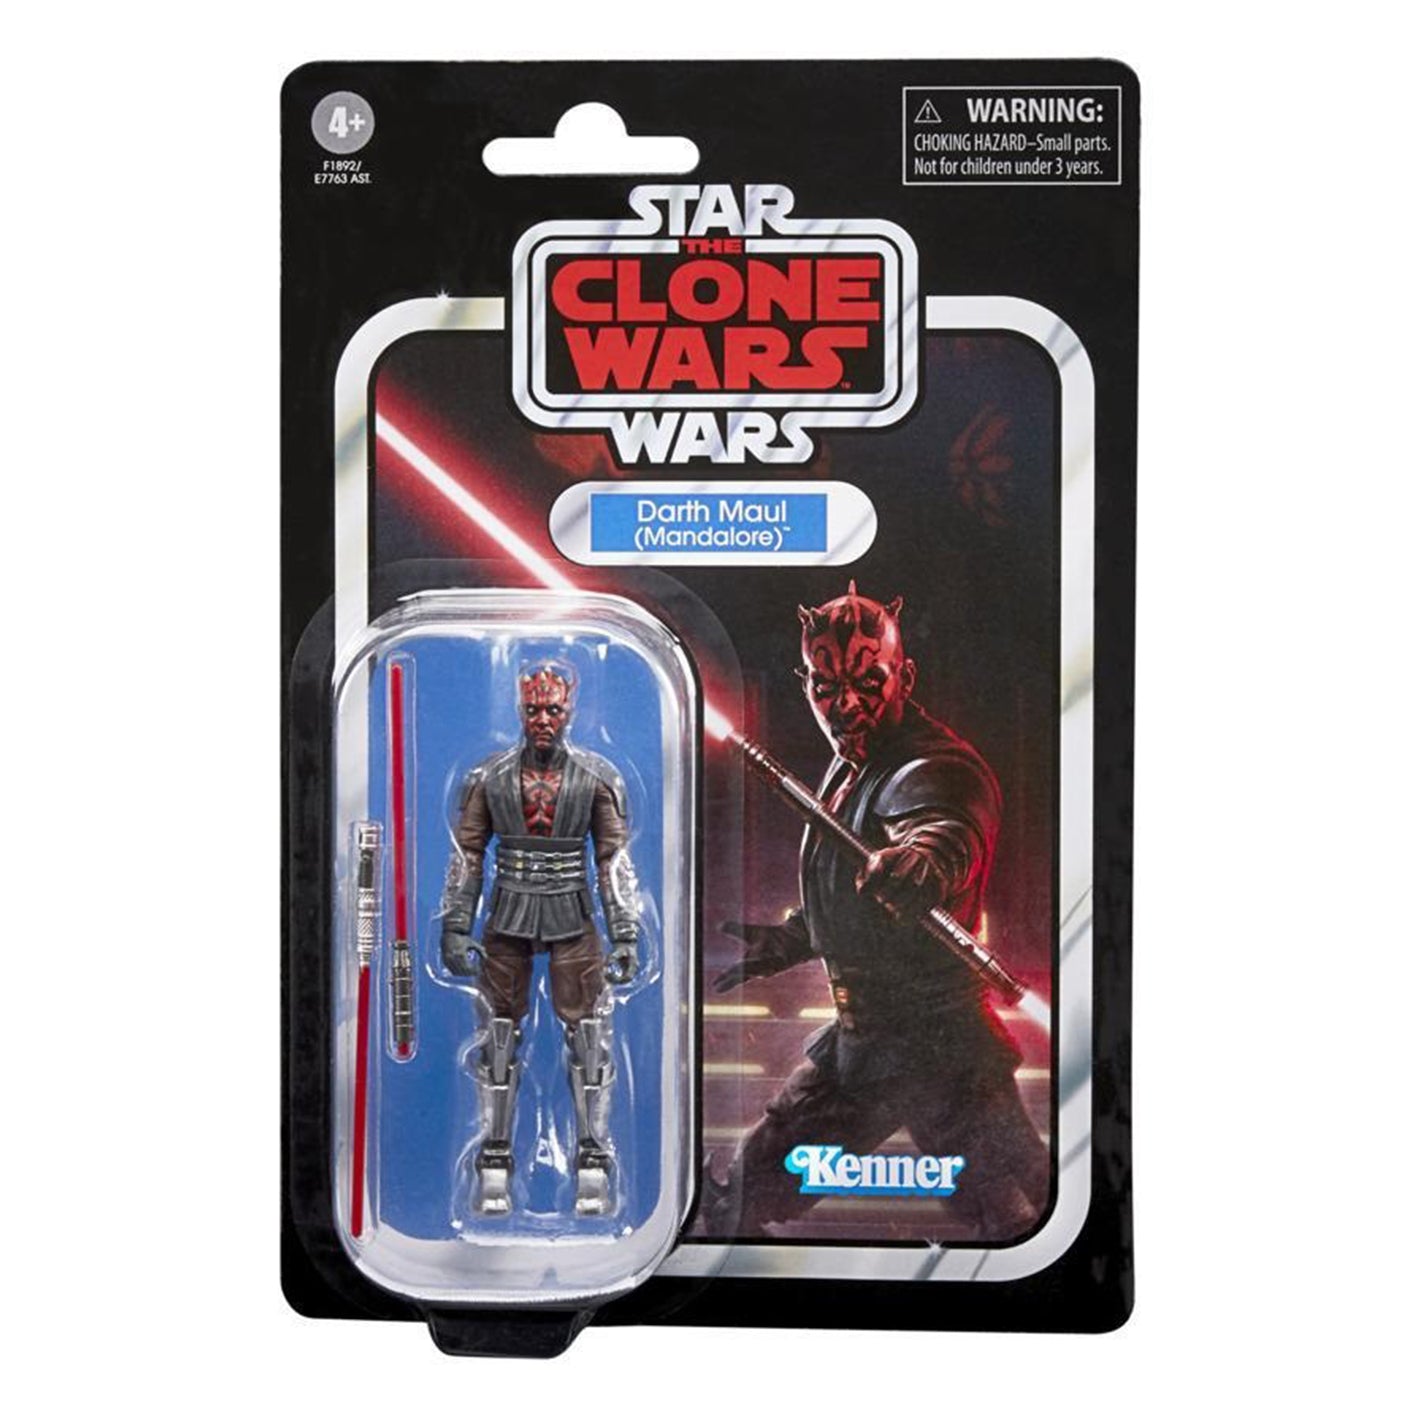 Darth Maul (Mandalore), Star Wars: The Vintage Collection